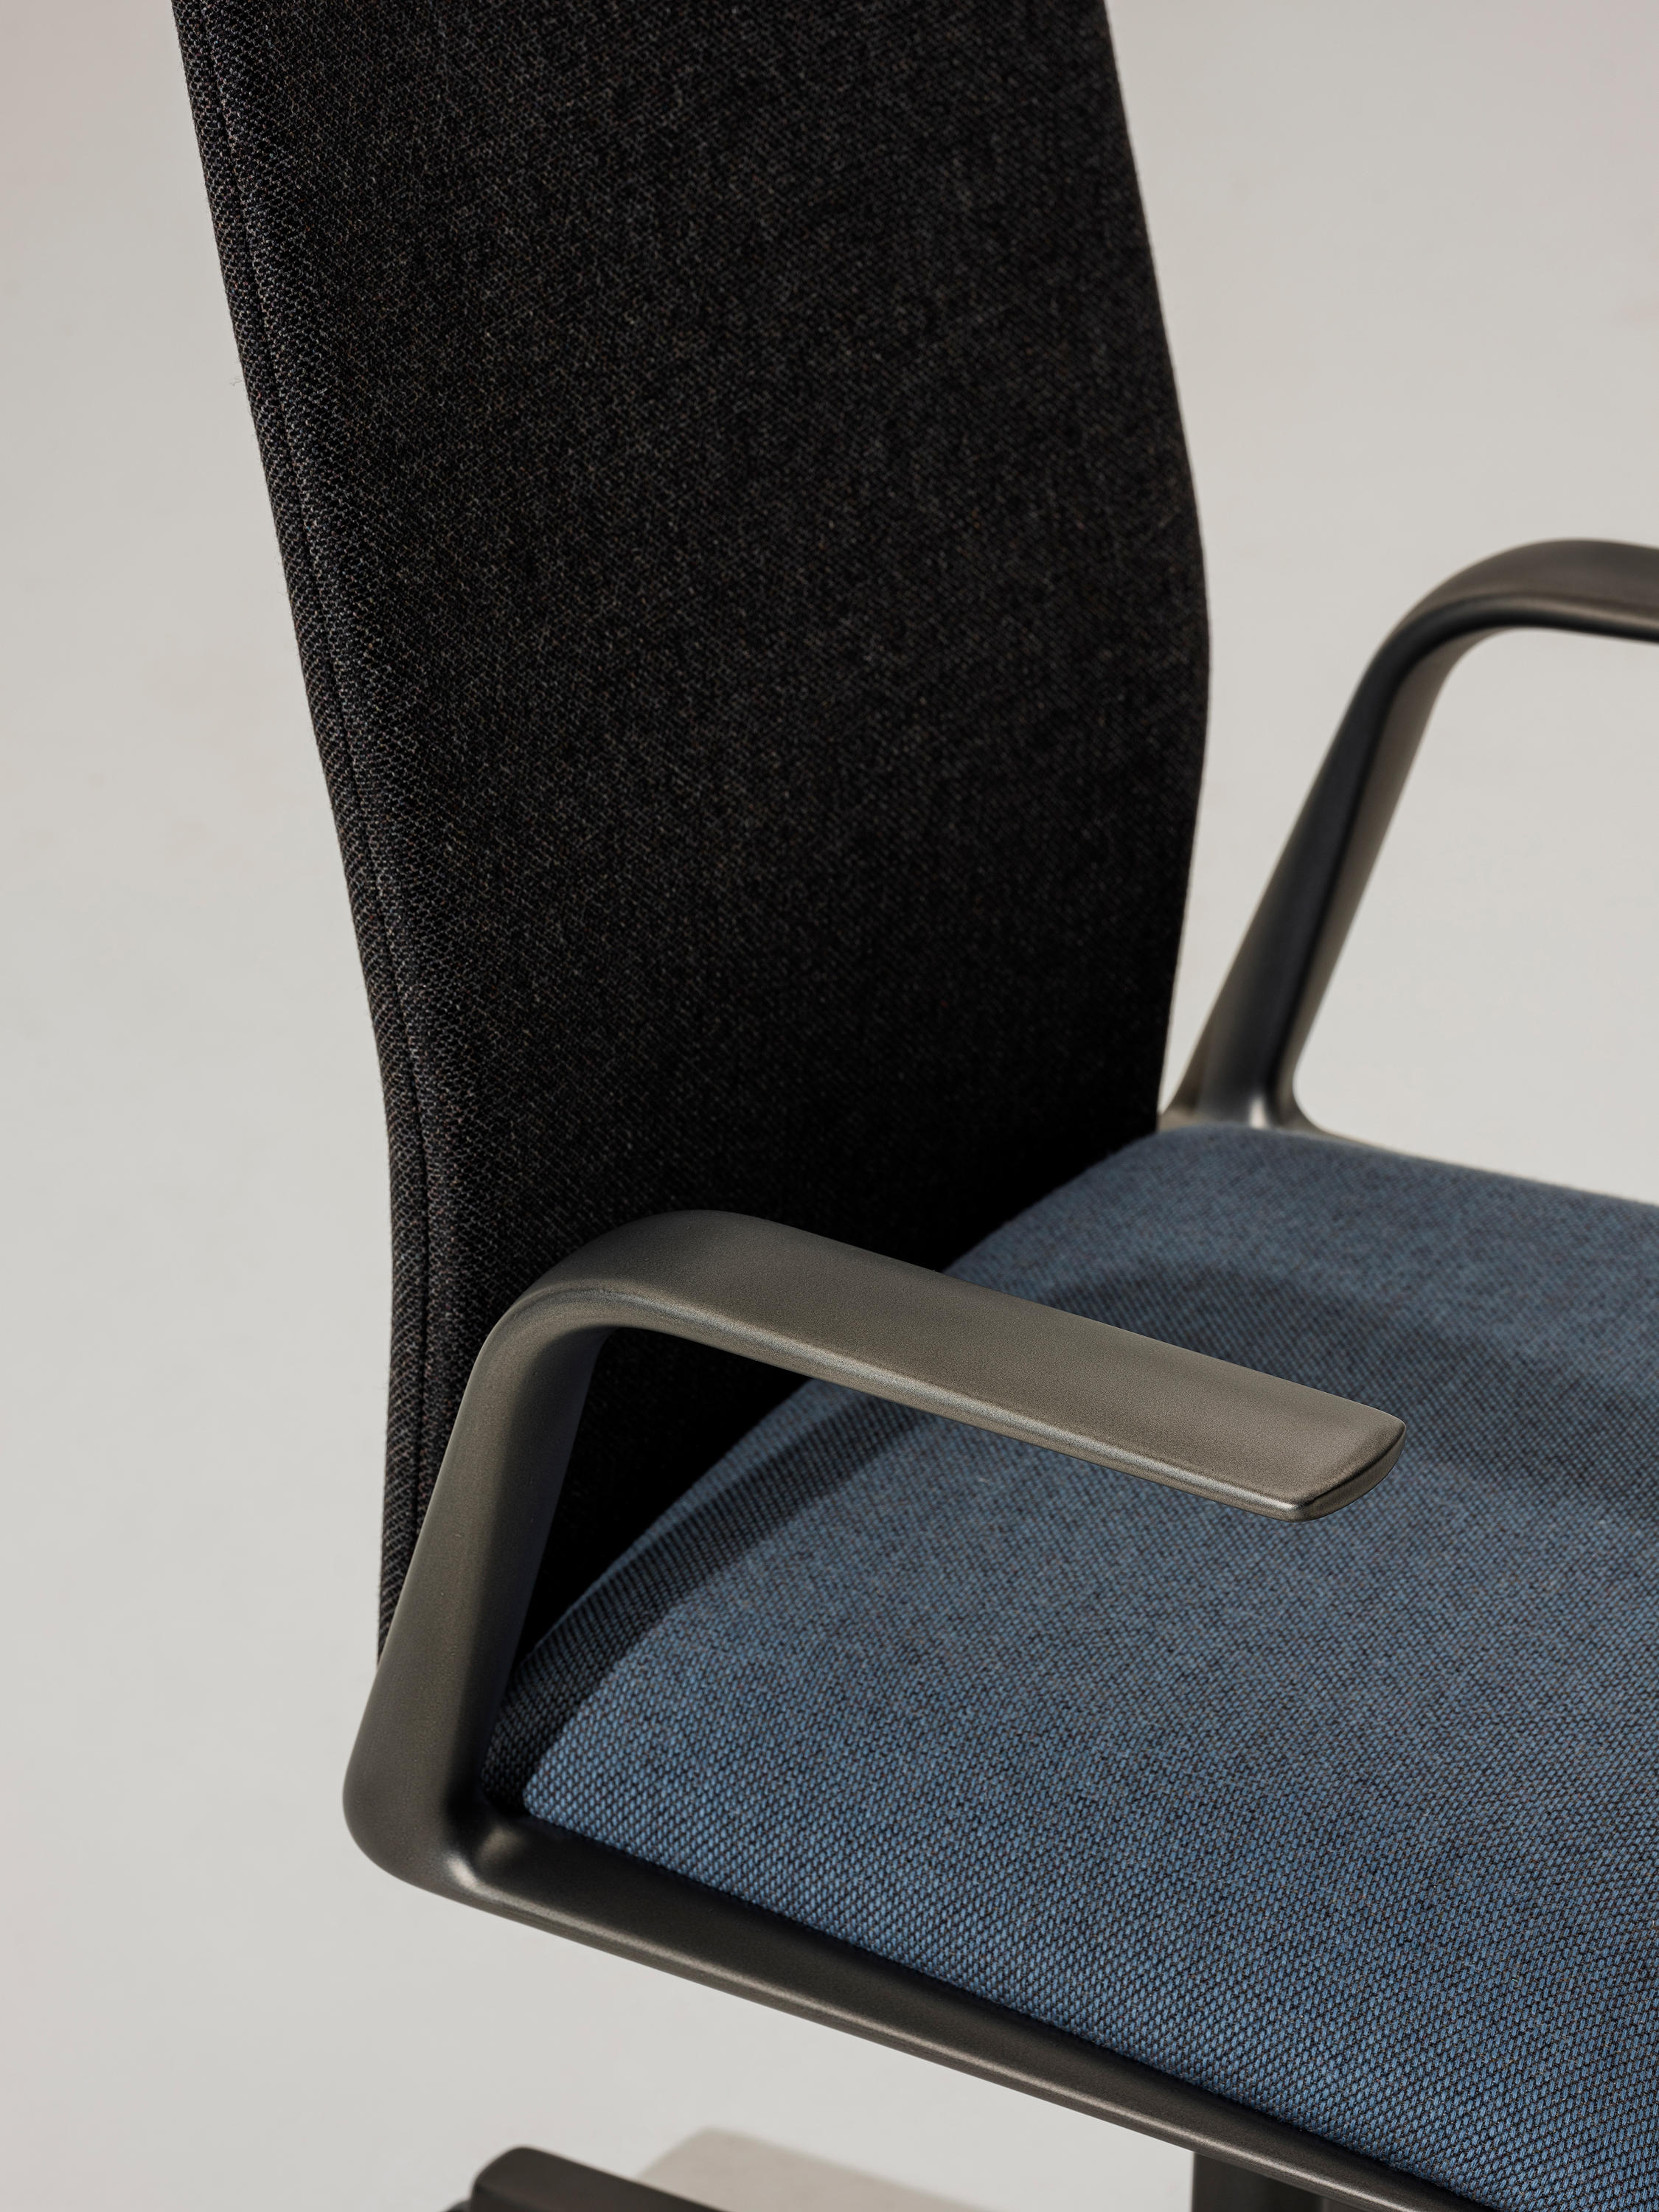 KINESIT - Chairs from Arper | Architonic